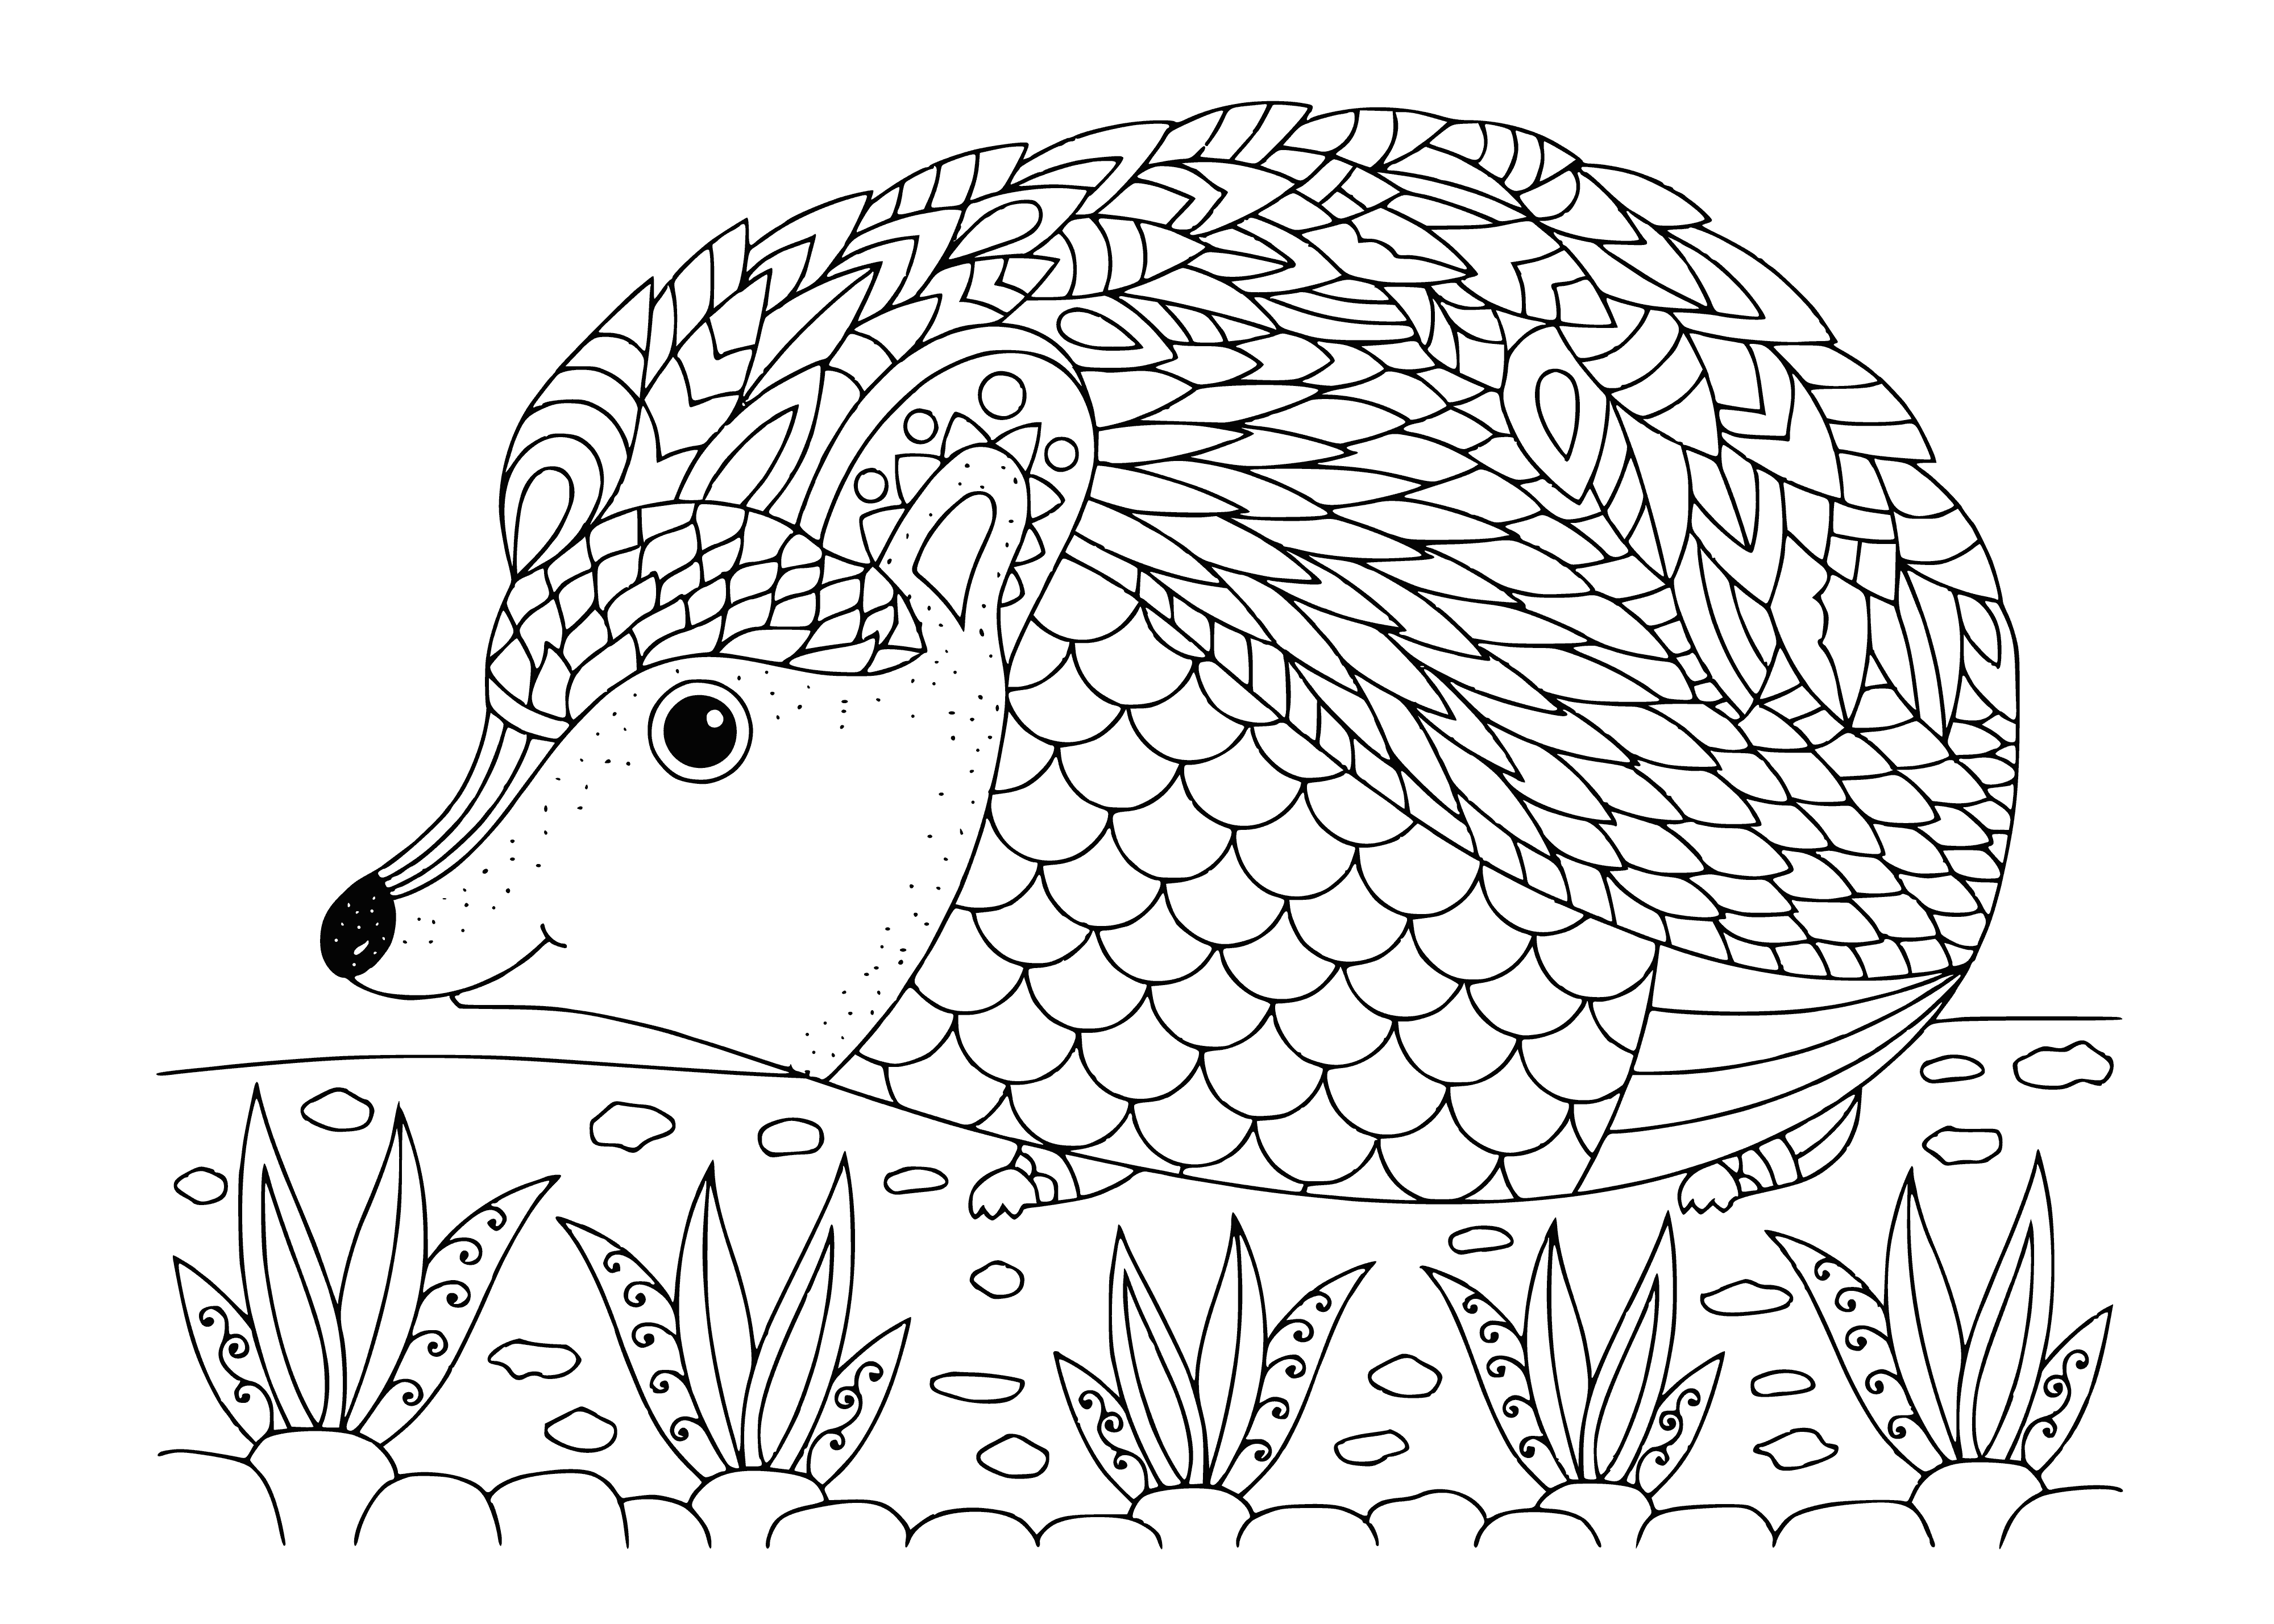 coloring page: A hedgehog is curled up on a patch of grass, with prickly quills, black eyes, pink nose, and white belly.